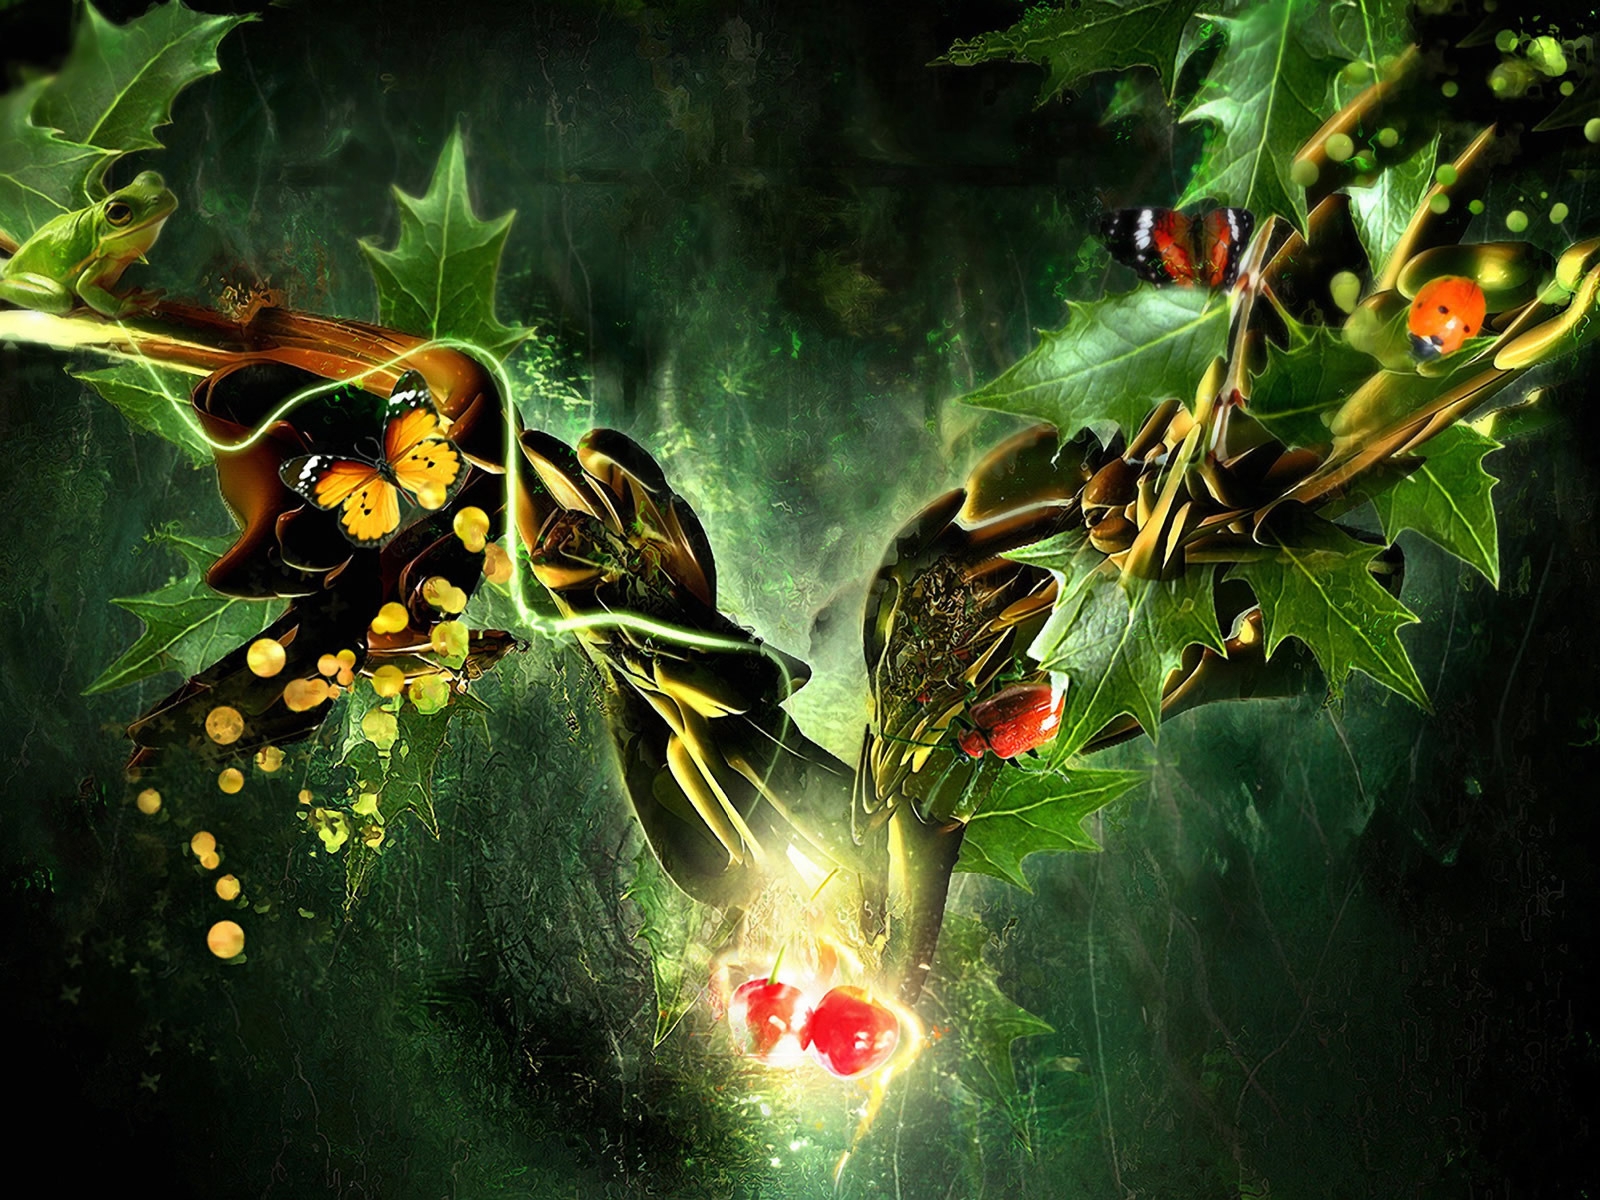 Butterfly, Ladybug, Frog in a Fantasy World for 1600 x 1200 resolution